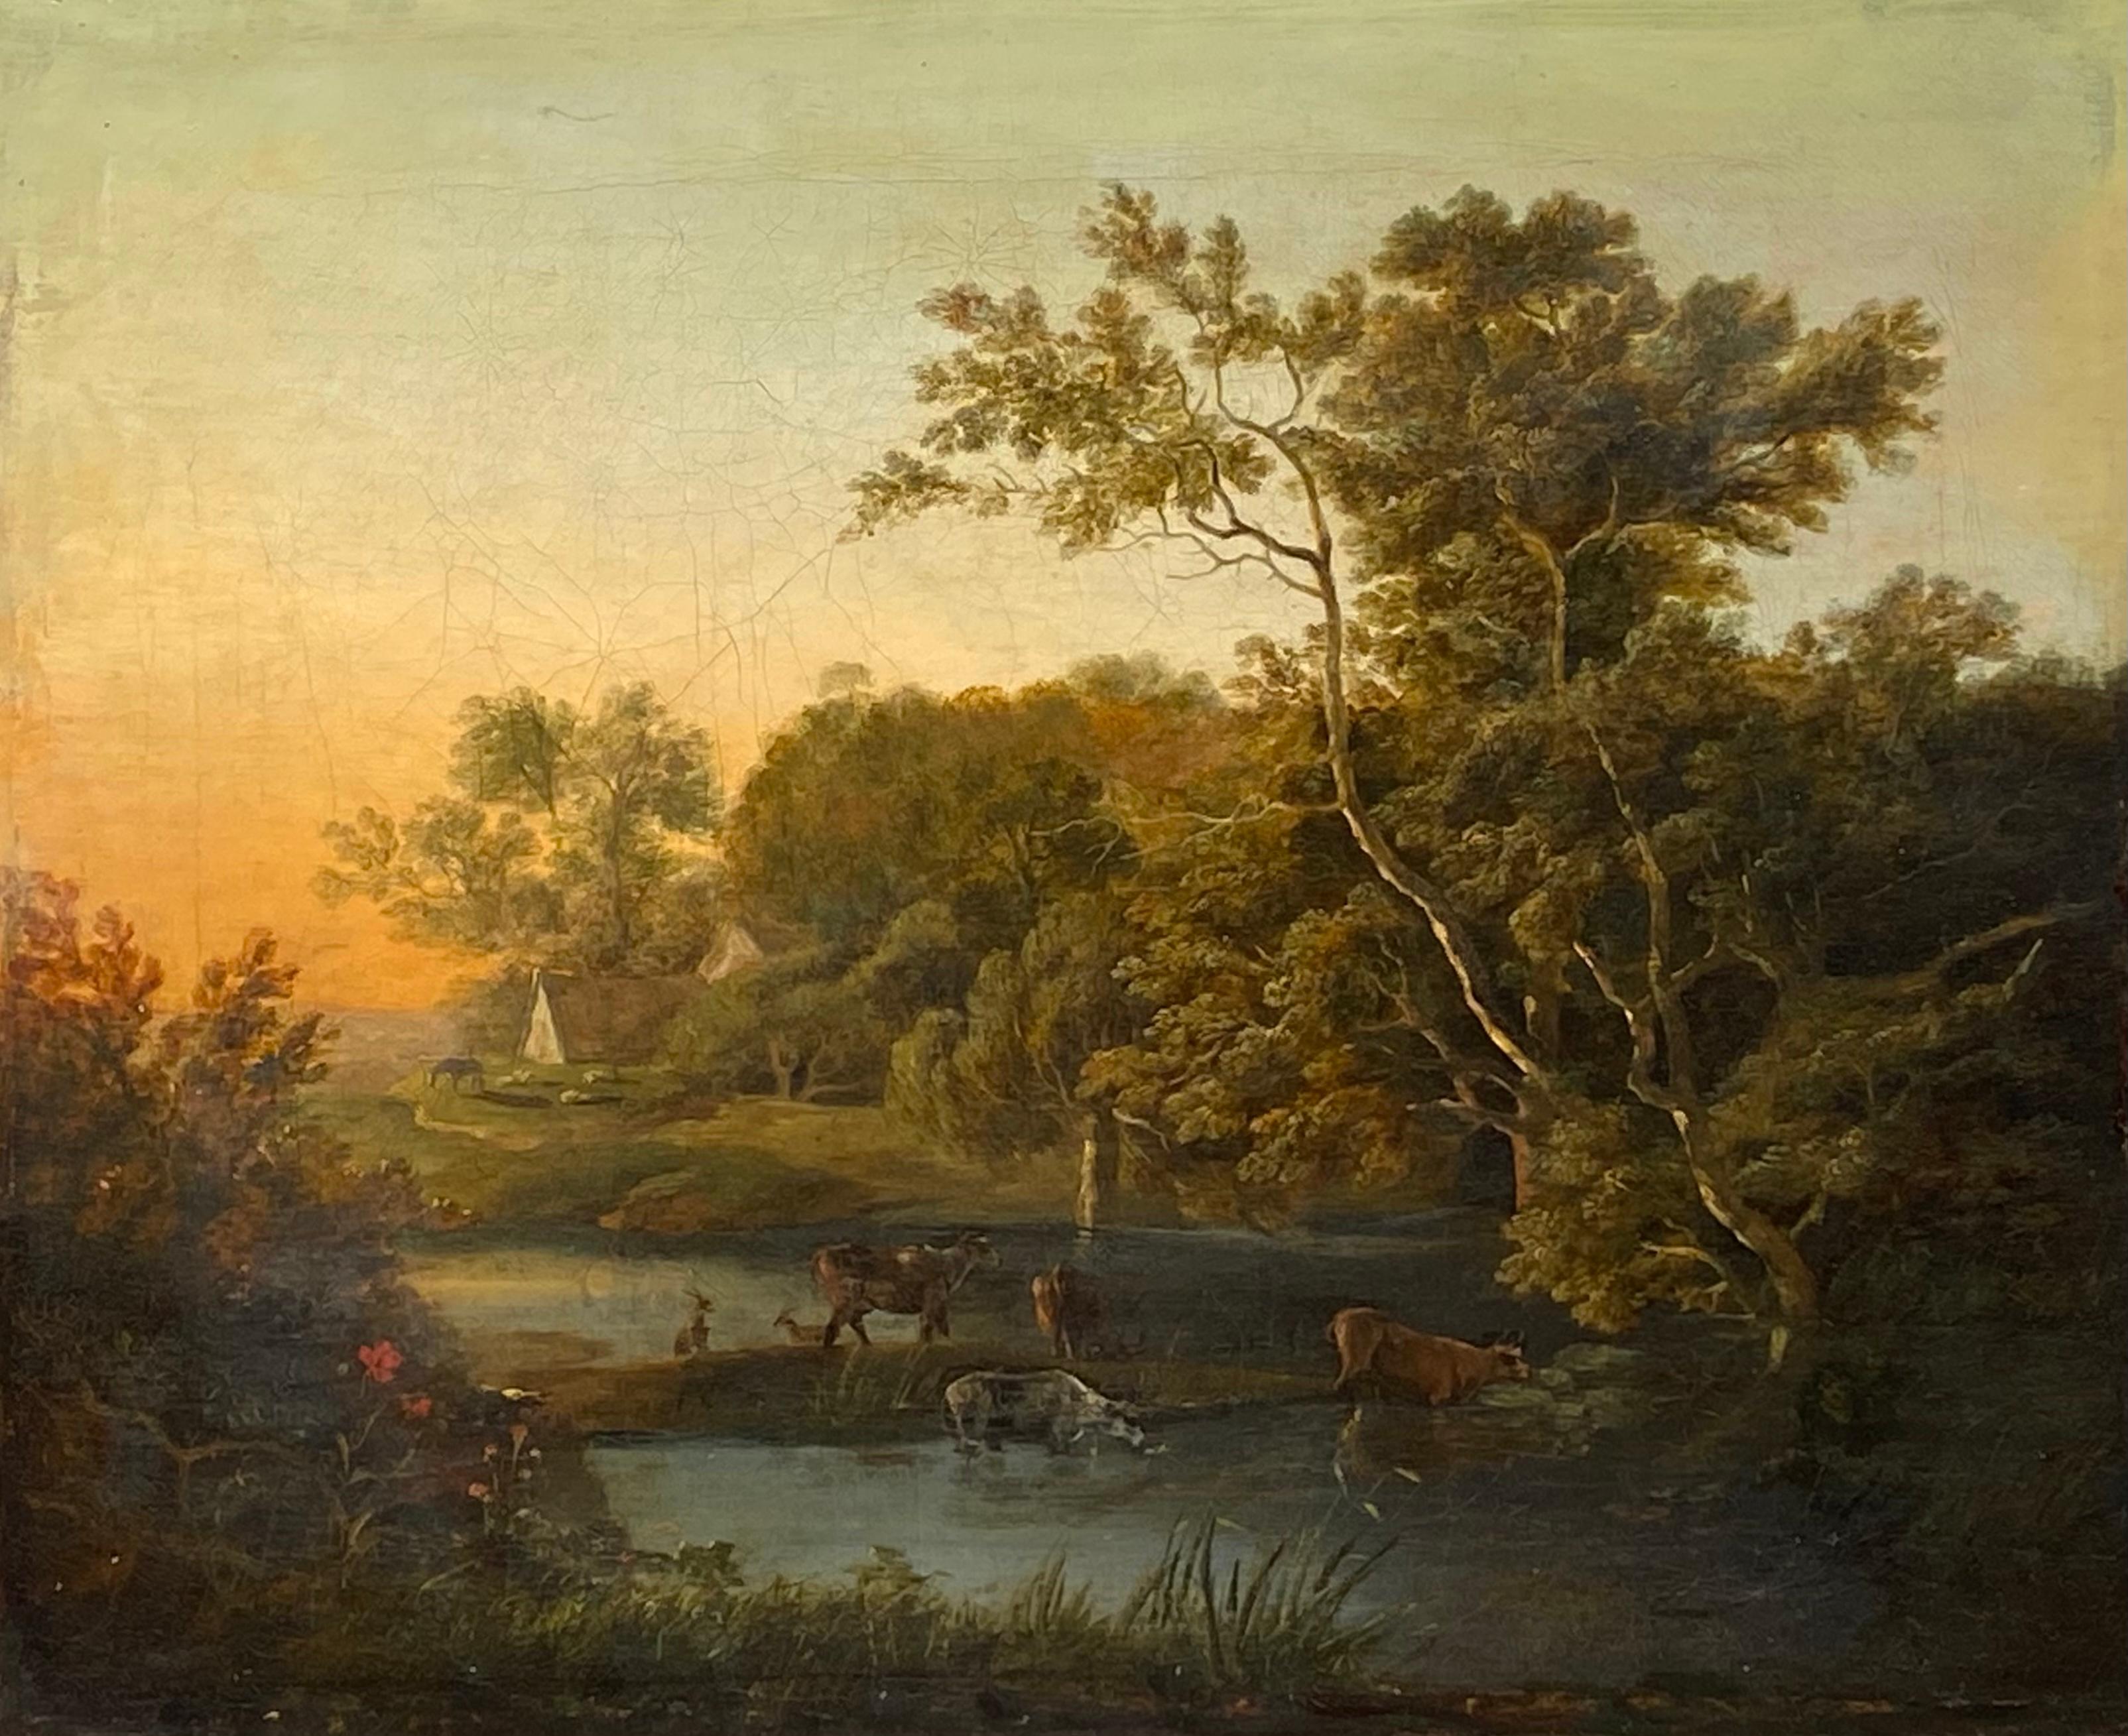 “Bucolic Landscape at Sunset” - Painting by Ramsay Richard Reinagle